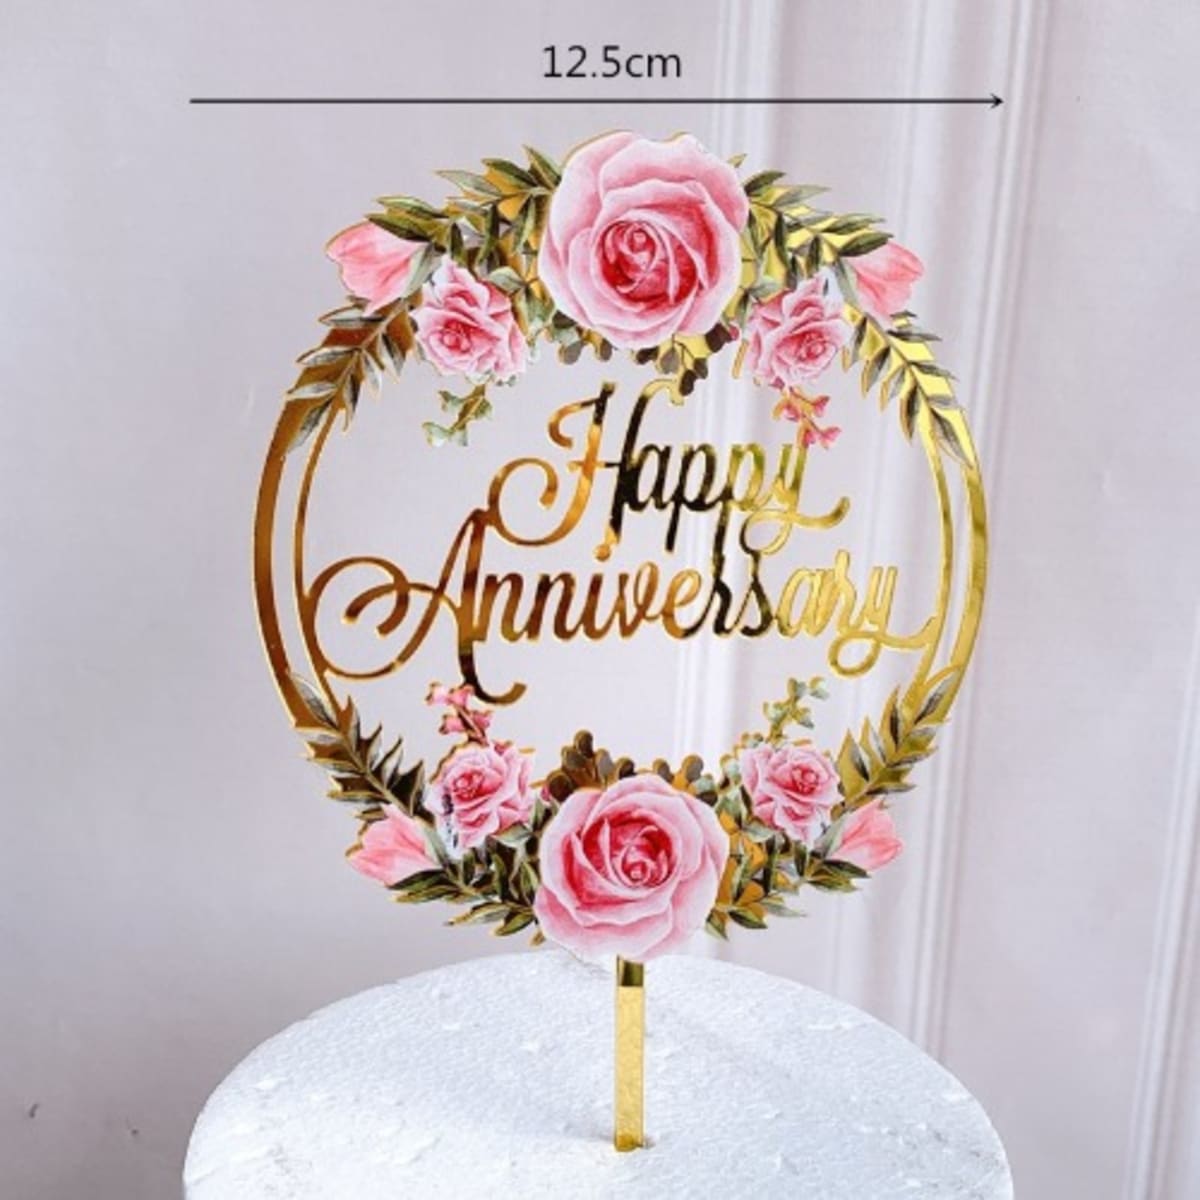 DIY Paper Flower Cake Toppers - Party Ideas | Party Printables Blog